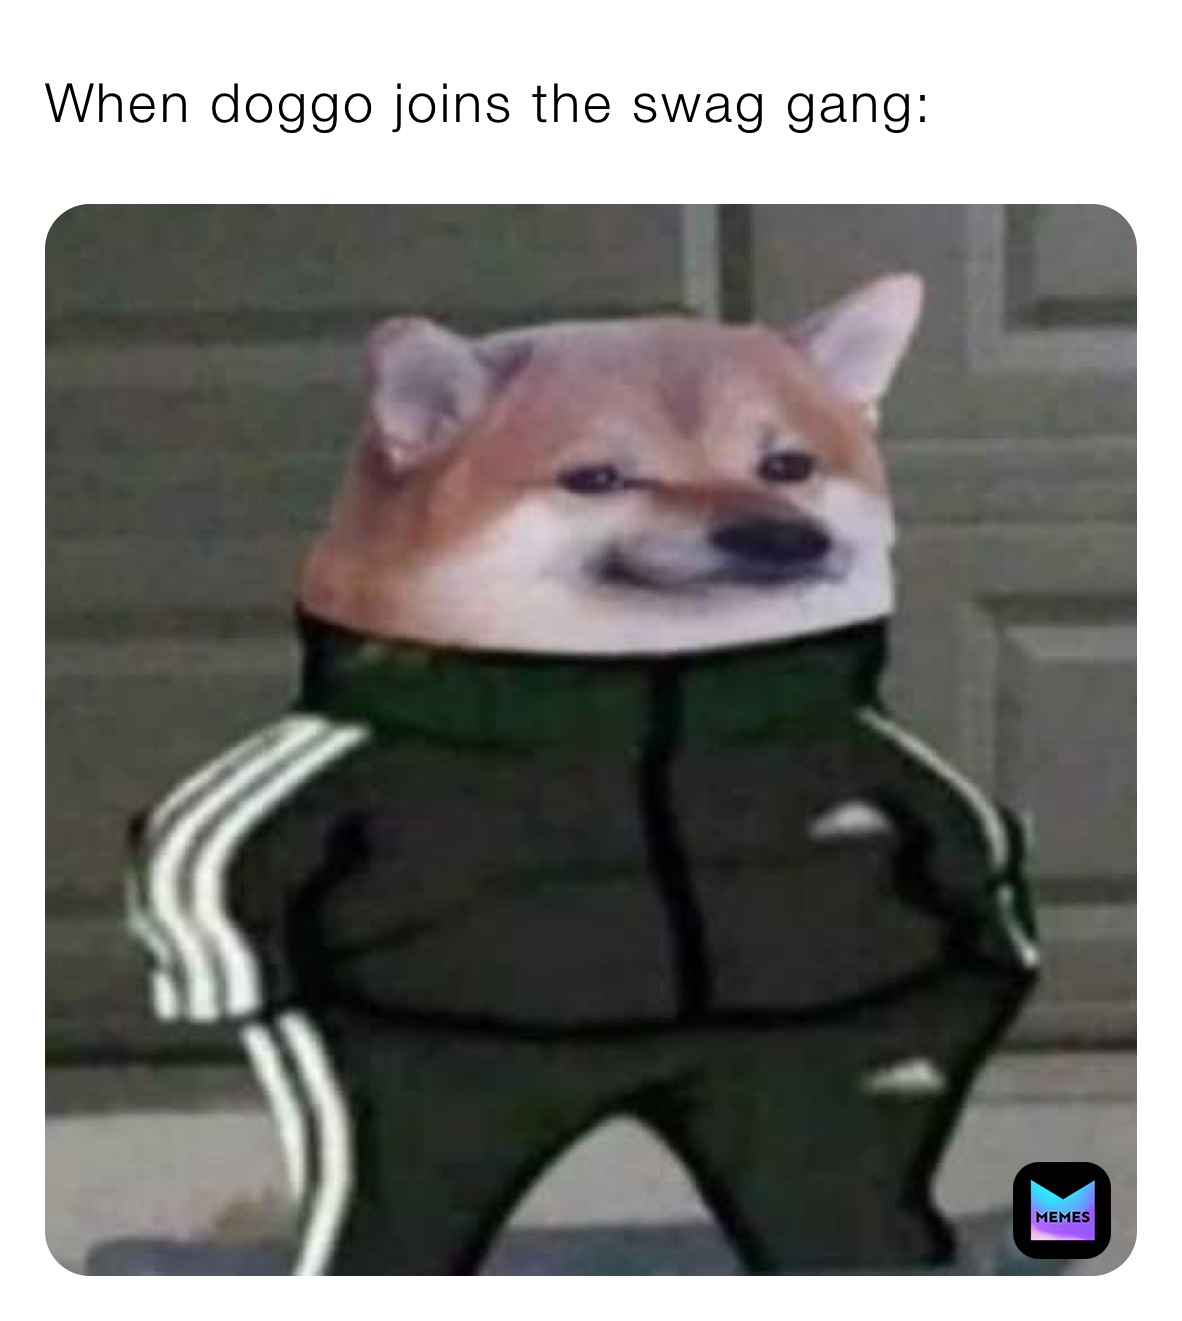 When doggo joins the swag gang: